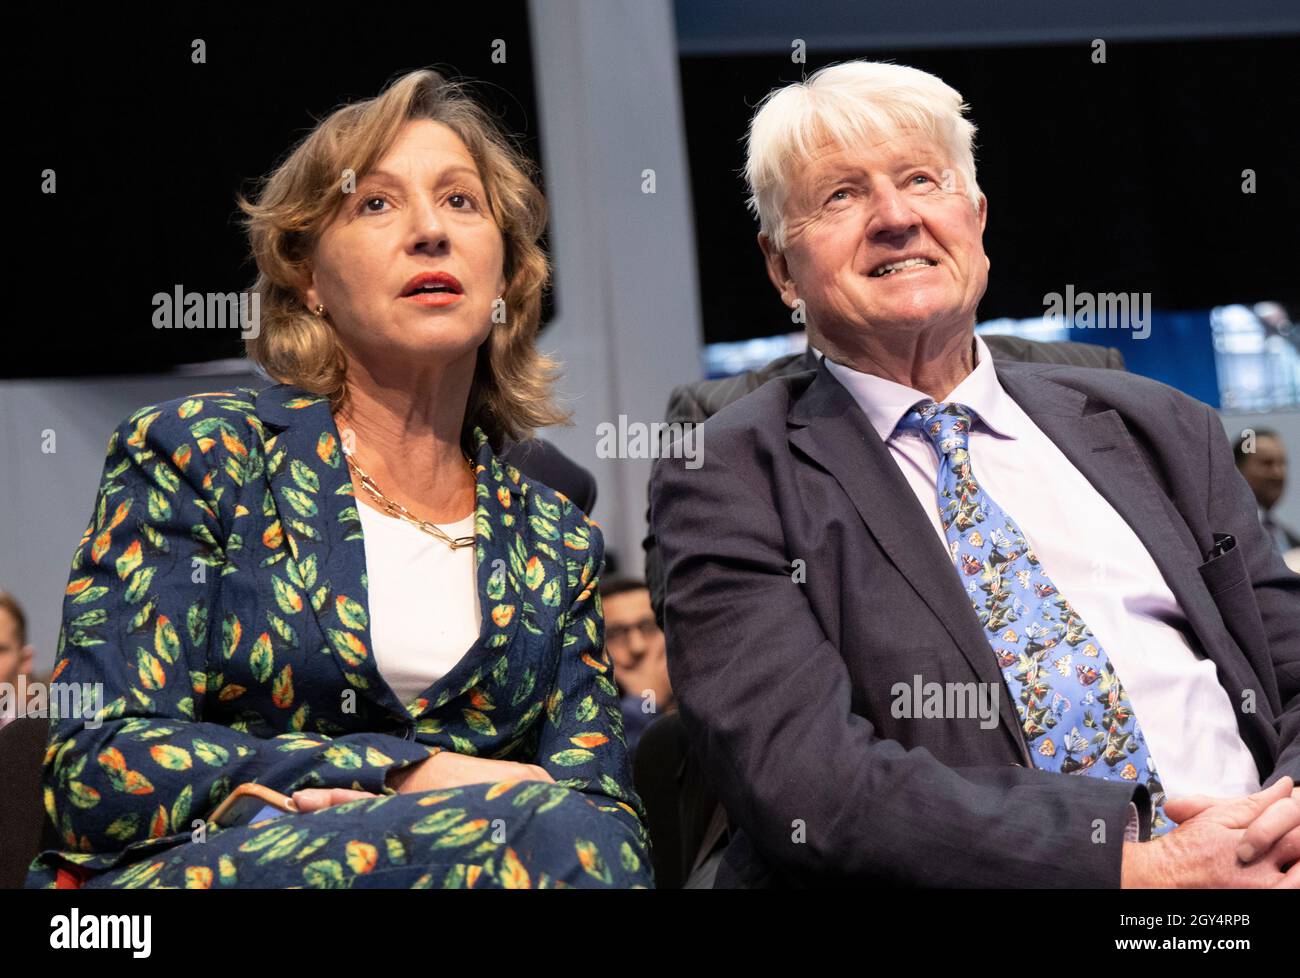 Rebecca Pow. Parliamentary under Secretary for Domestic Environment and Stanley Johnson, father of Prime Minister, Boris Johnson at a fringe meeting. Stock Photo